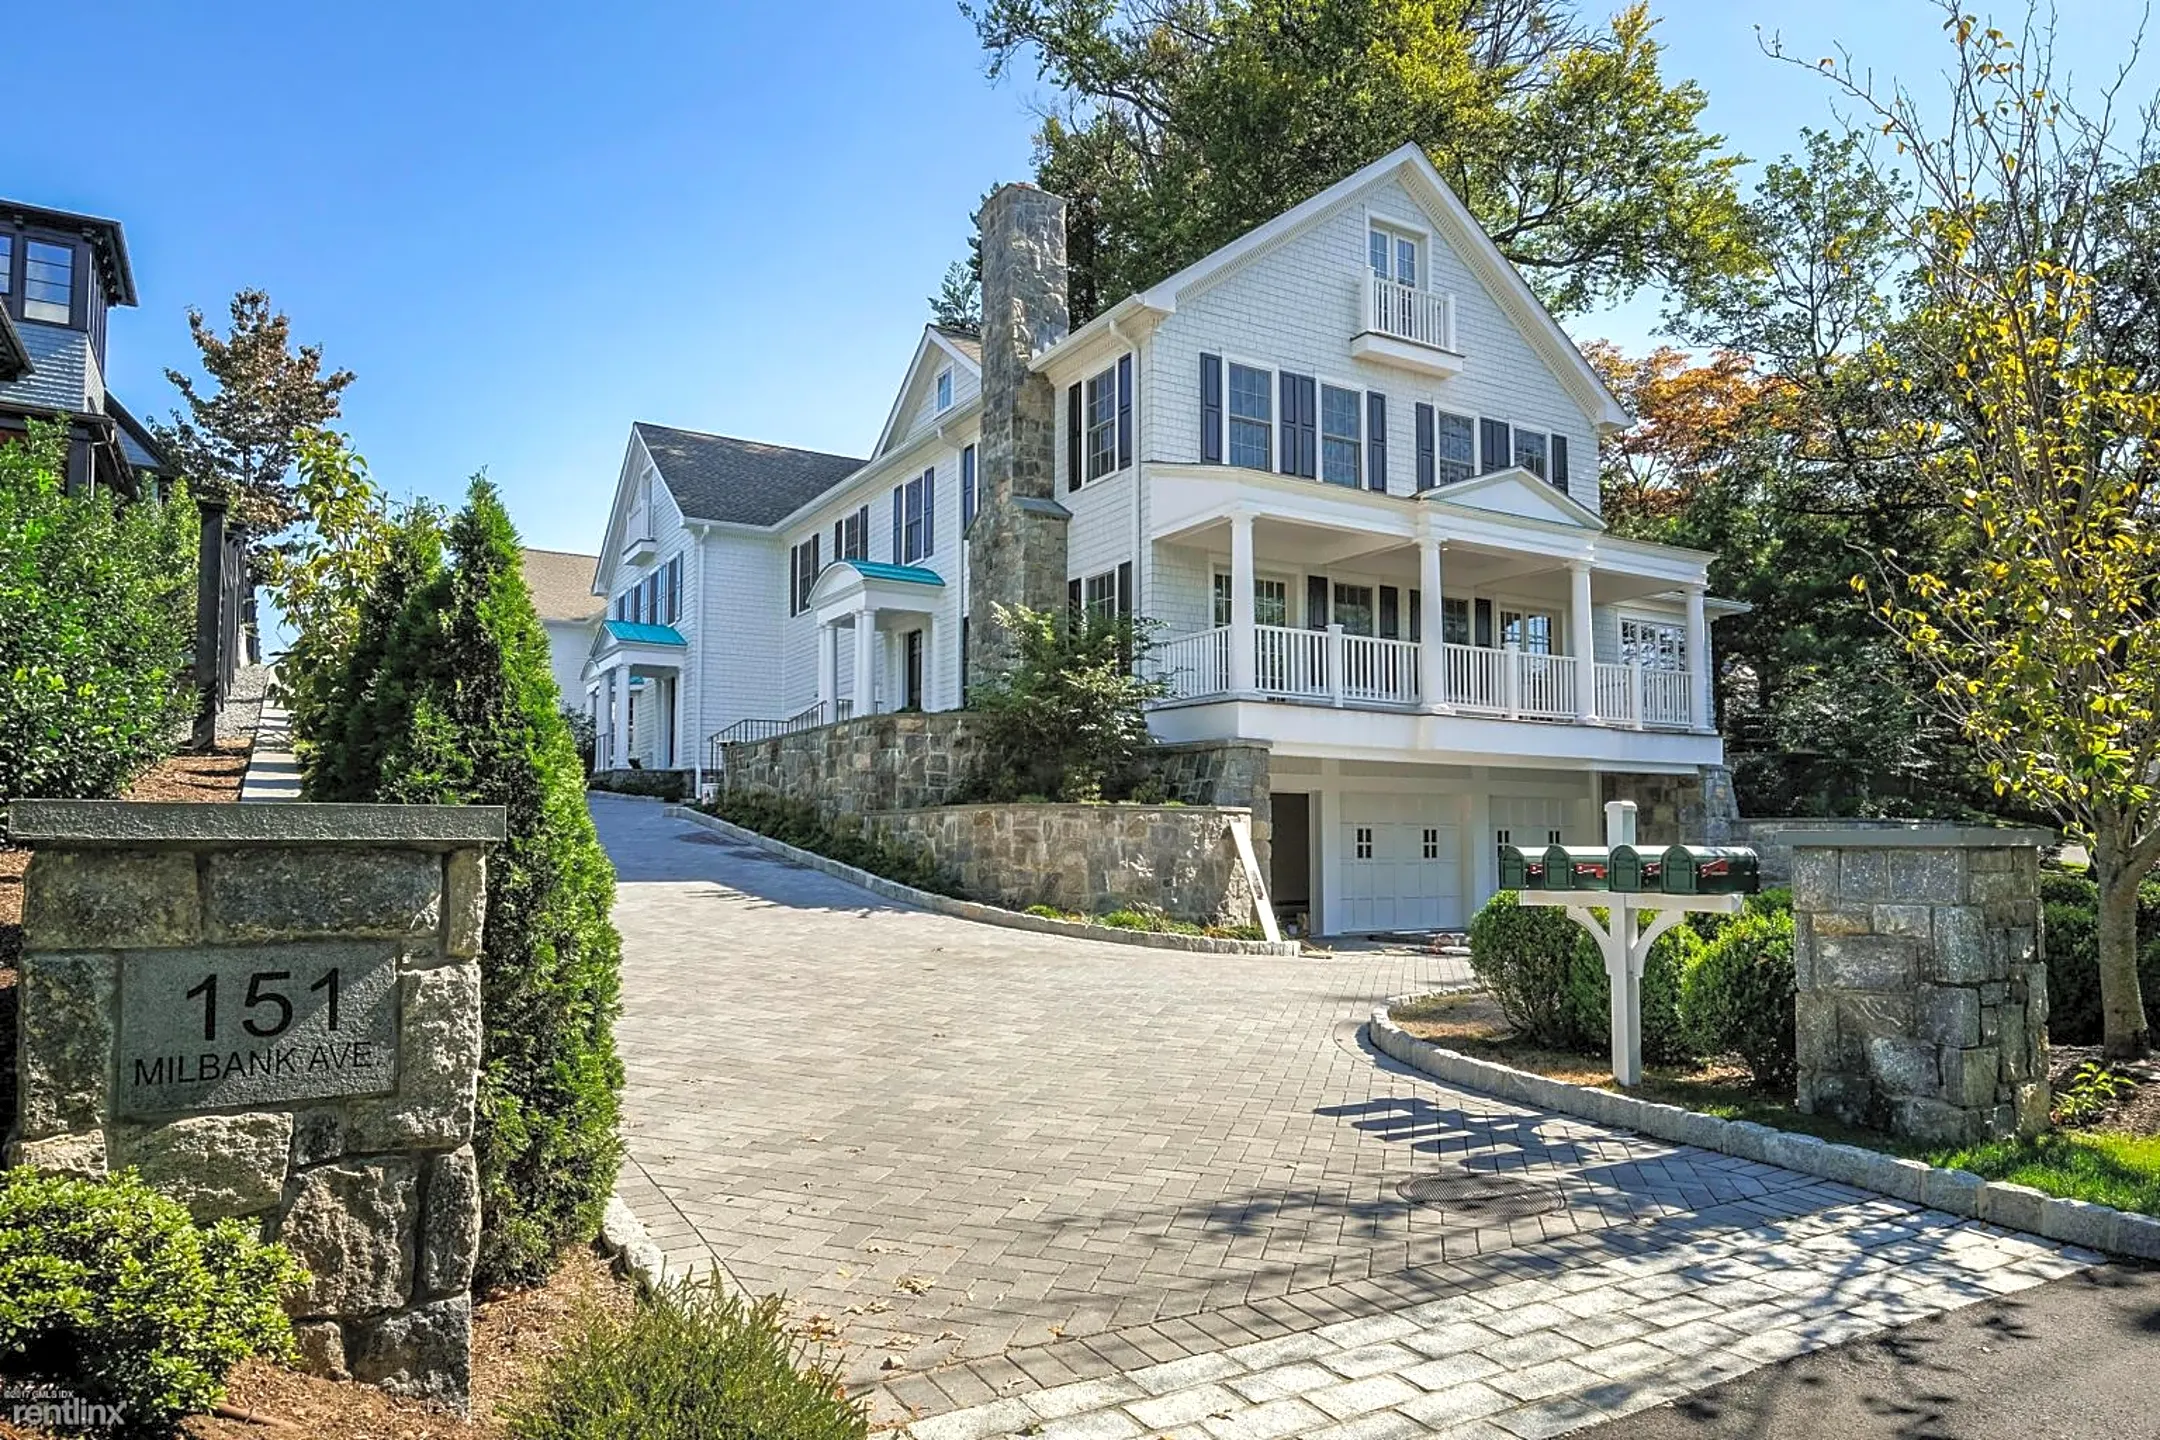 151 Milbank Ave | Greenwich, CT Townhomes for Rent | Rent.